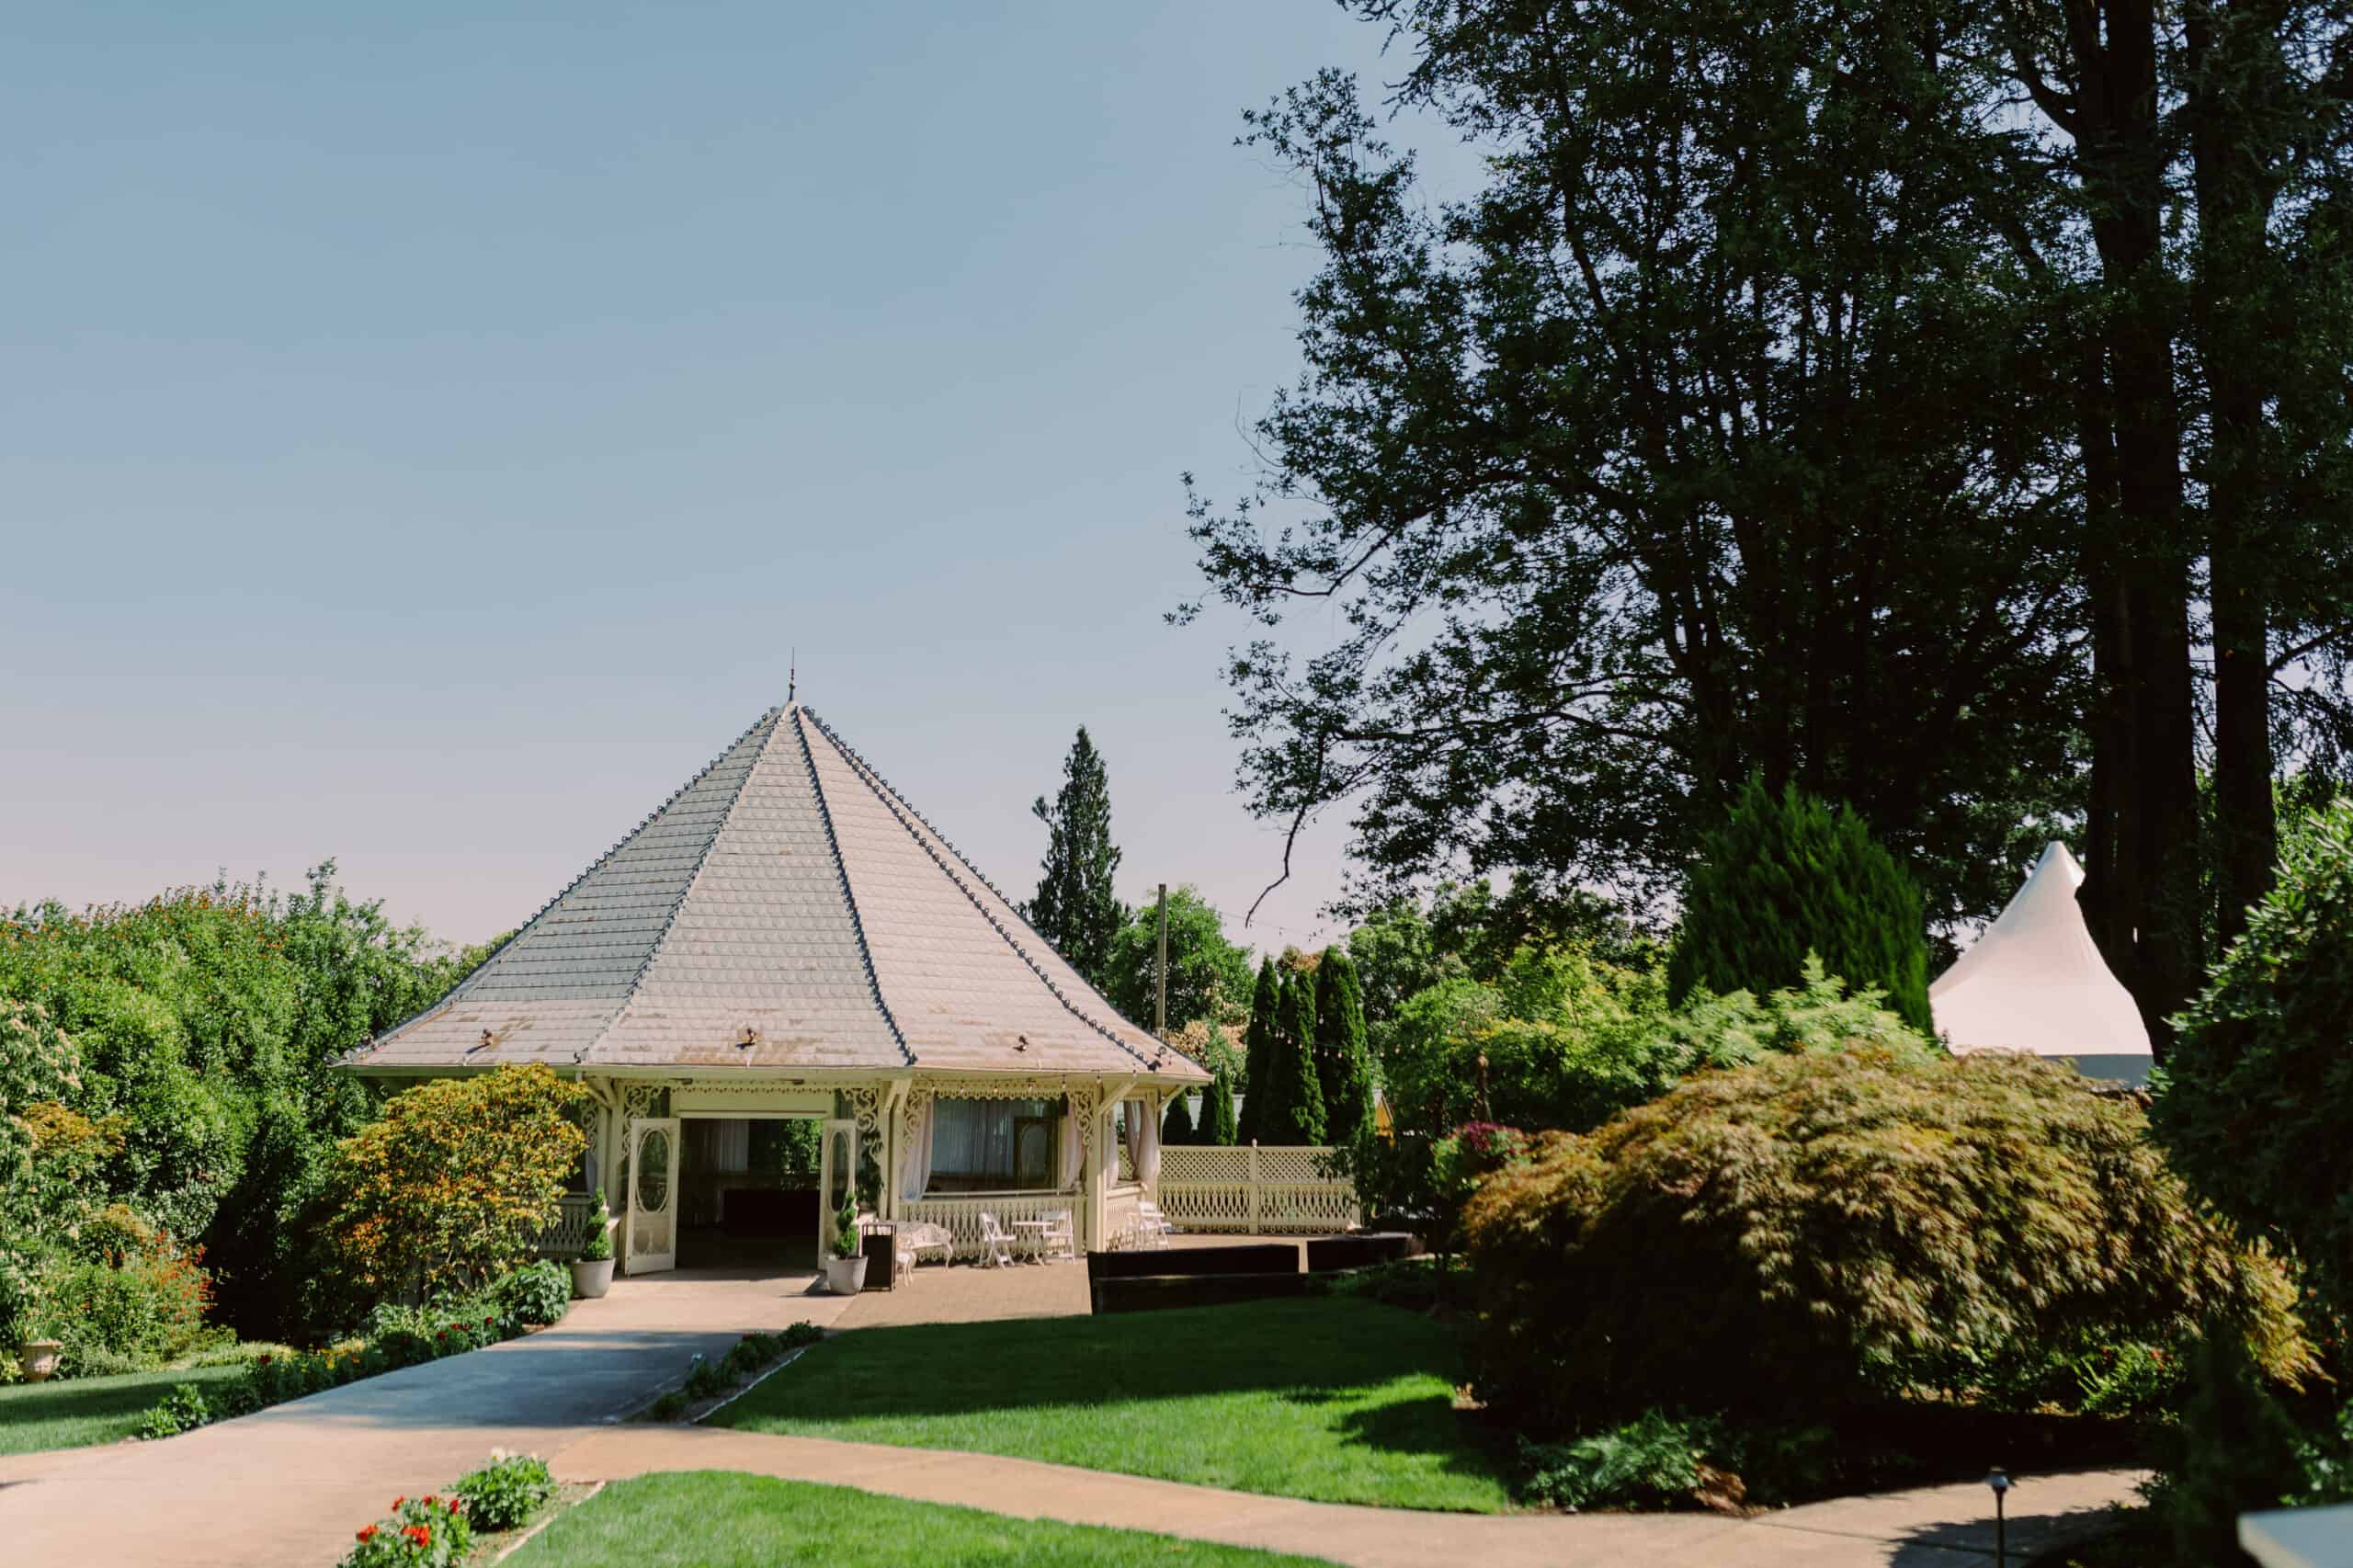 A white and grey gazebo is surrounded by shrubs, lawns, and a courtyard